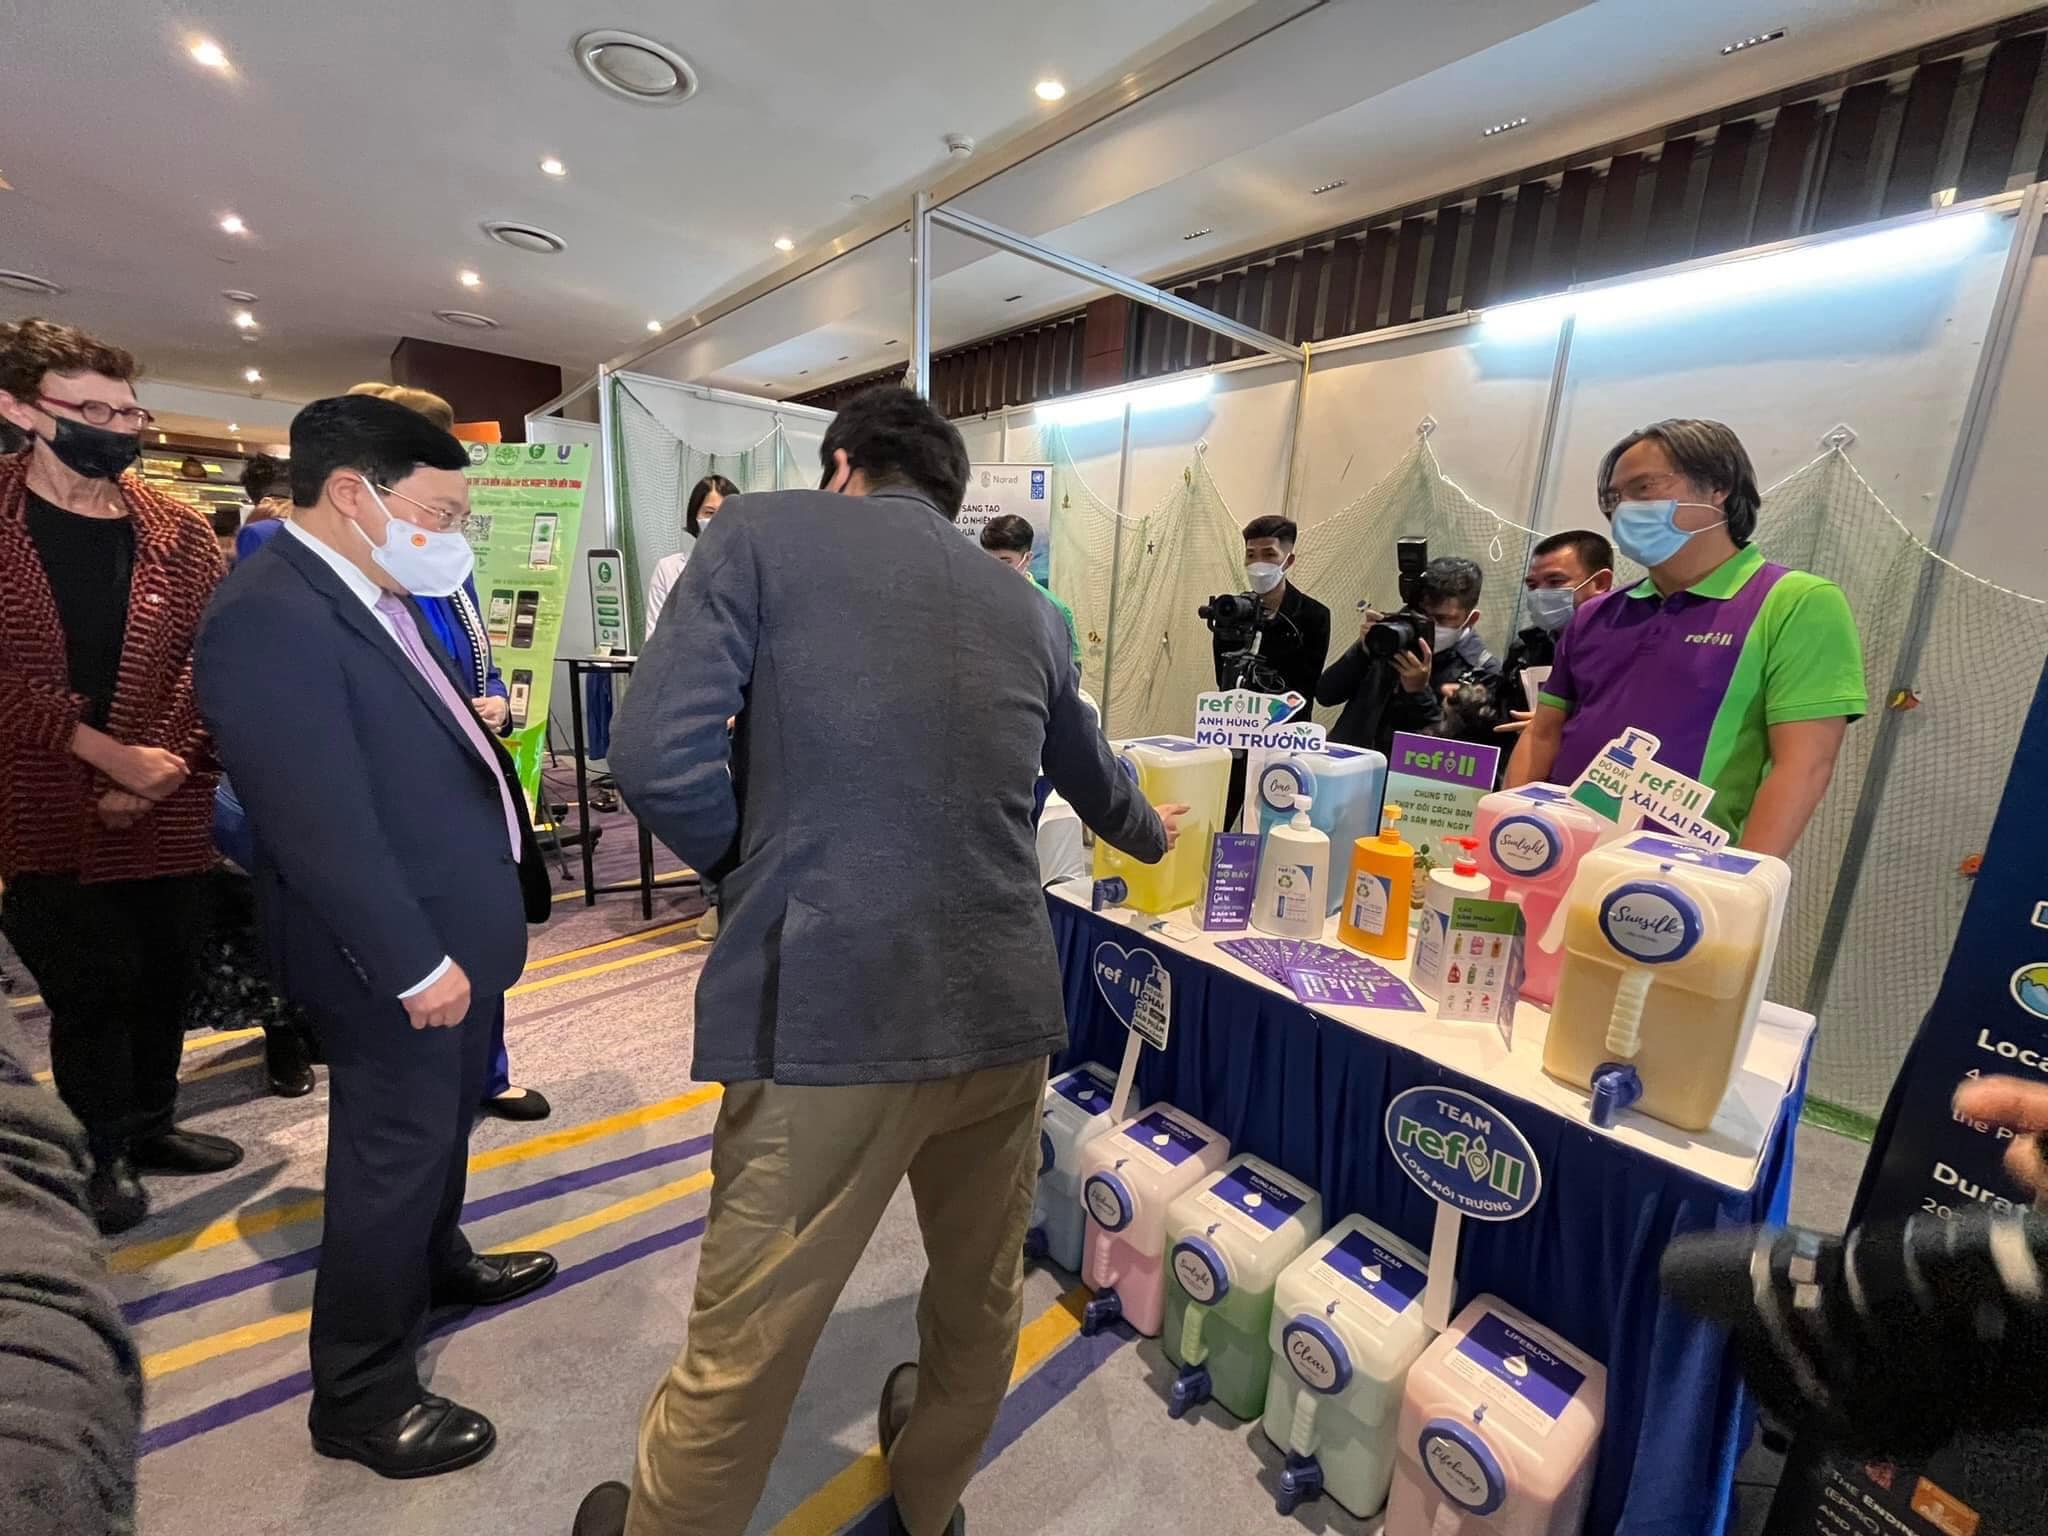 Vietnam’s Deputy Prime Minister Pham Binh Minh standing in front of Refill's stand 